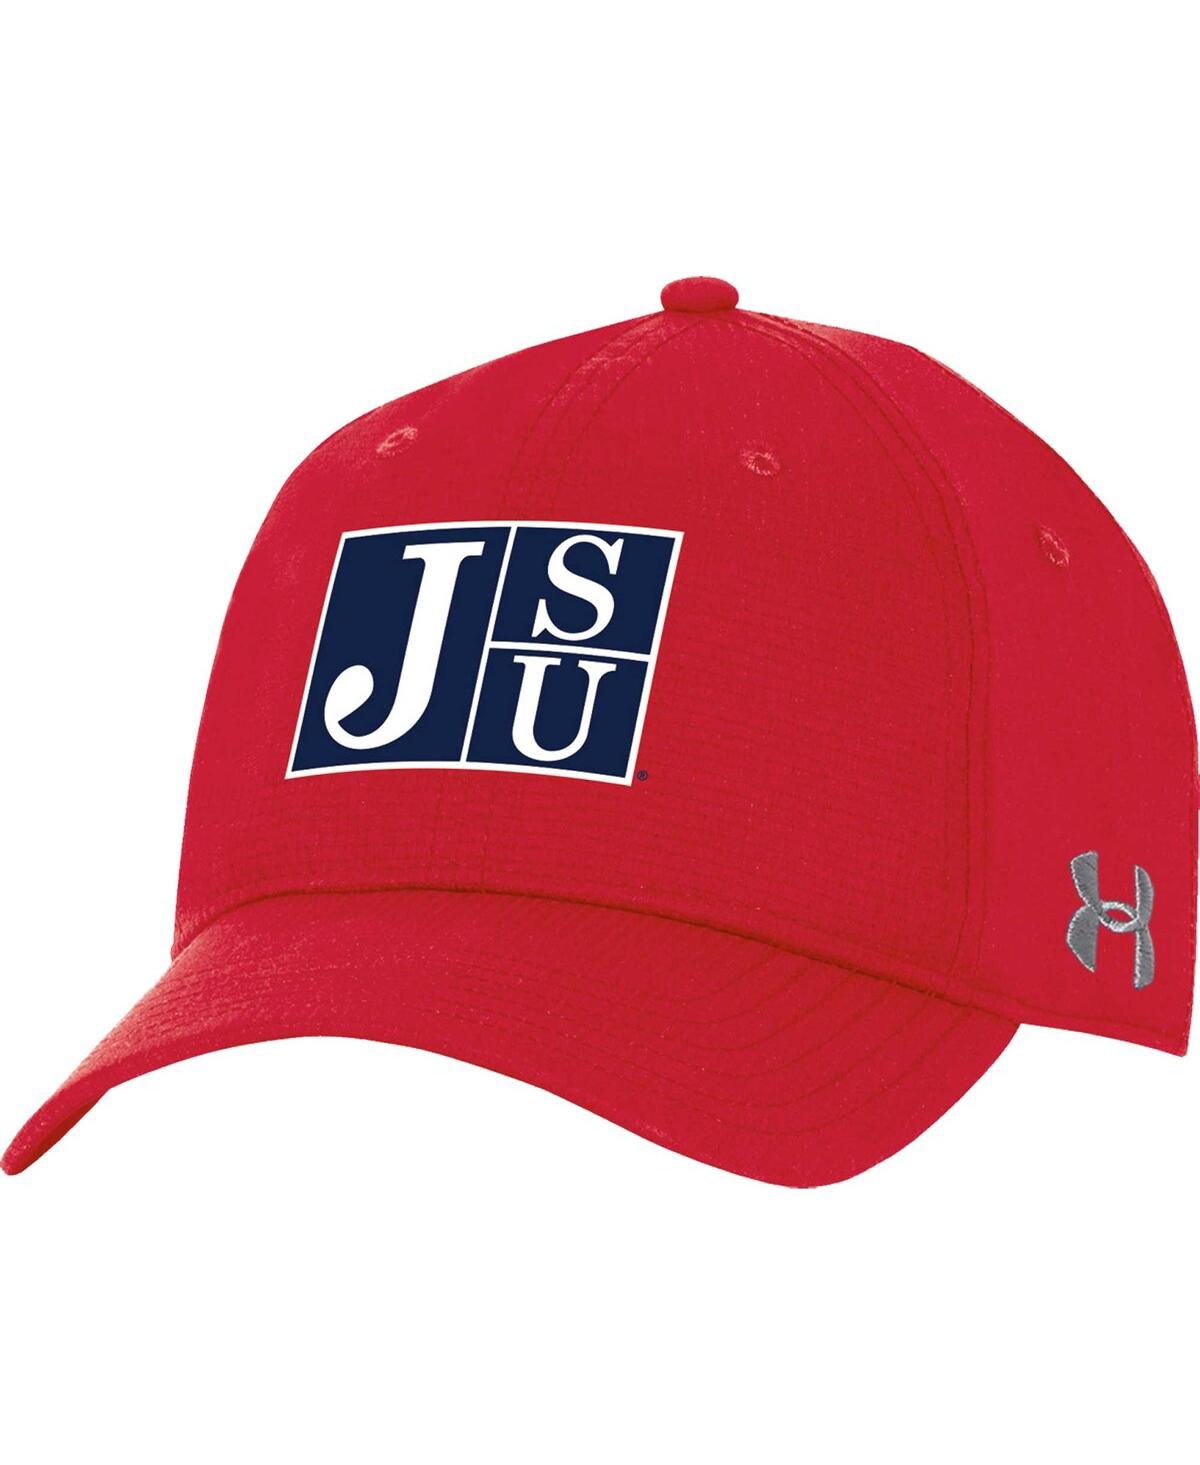 Under Armour Men's  Red Jackson State Tigers Coolswitch Airvent Adjustable Hat